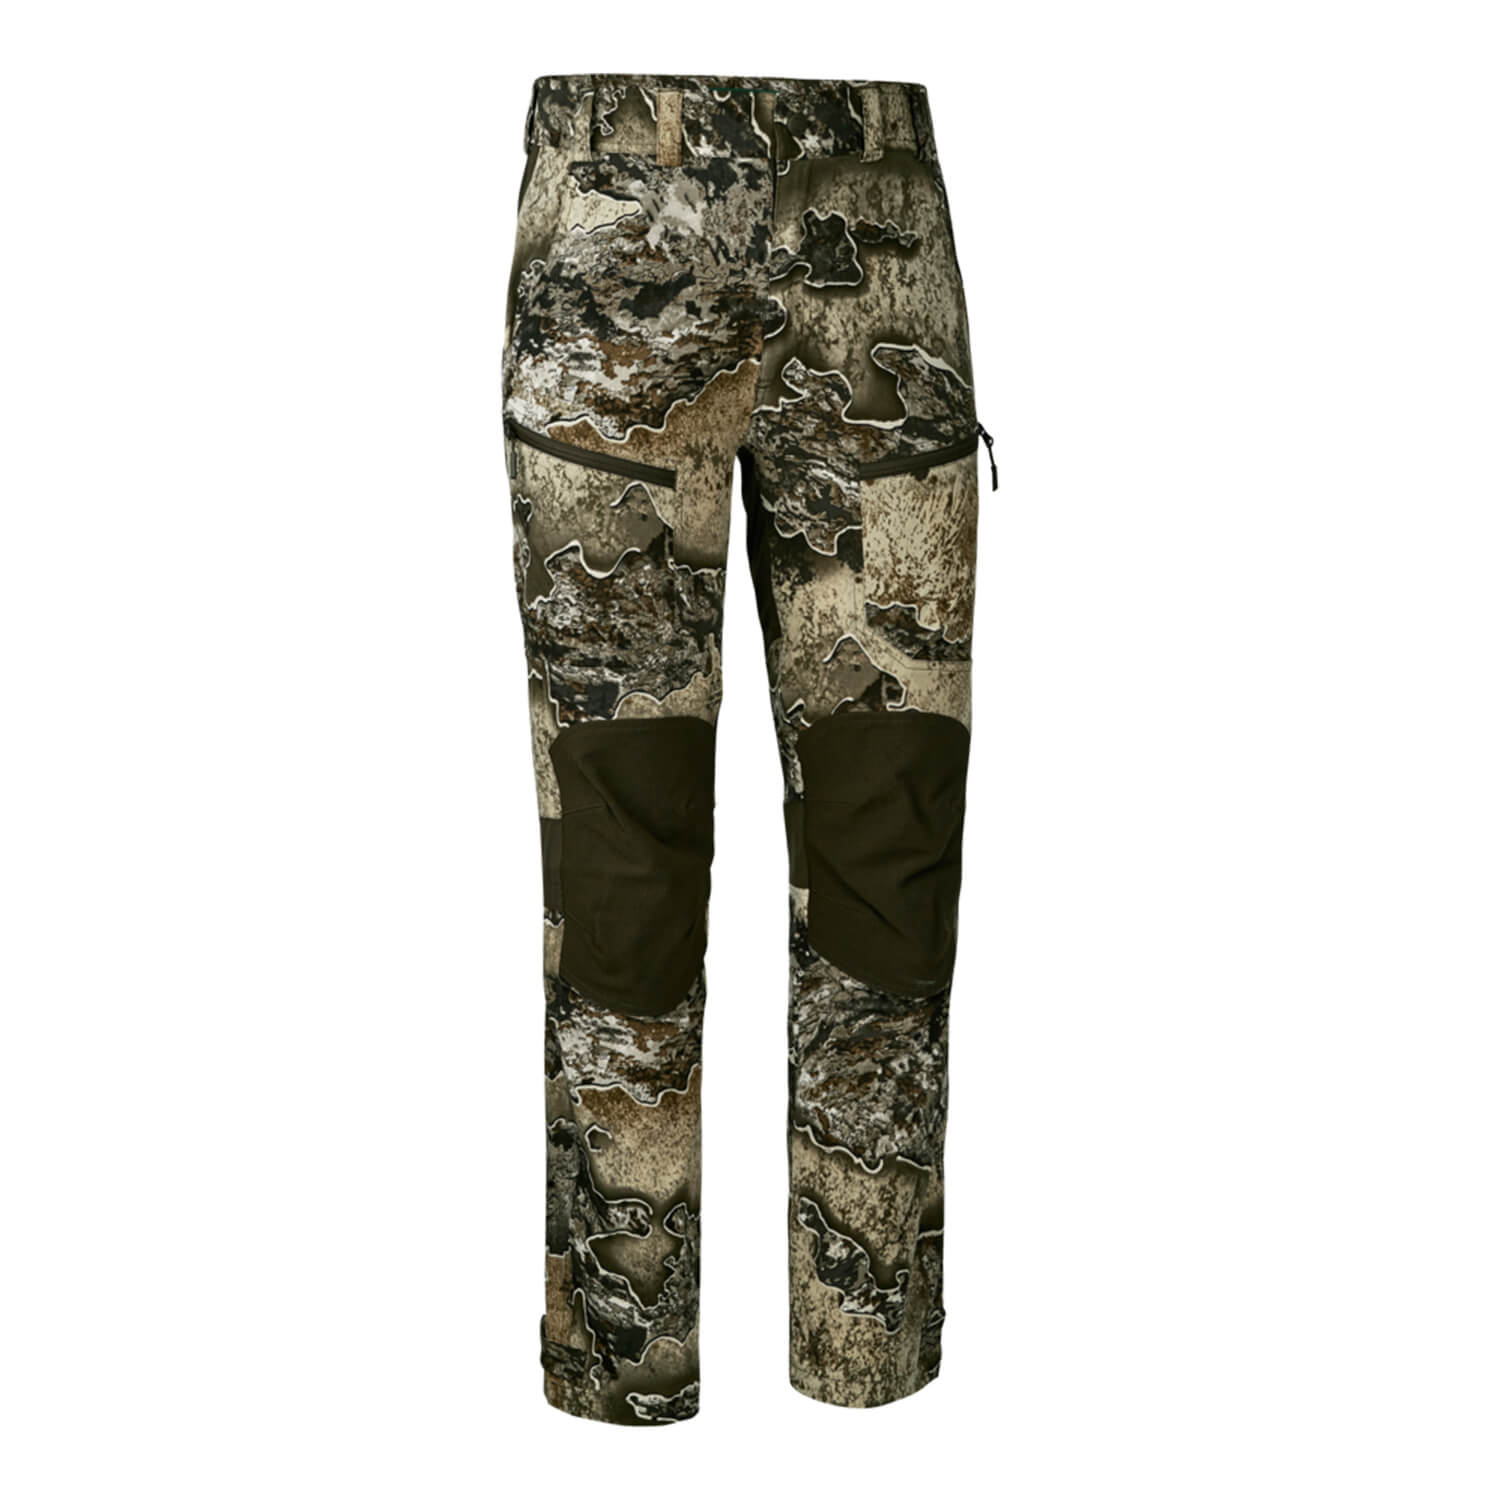 Deerhunter Trousers Excape Light (Realtree Excape) - Hunting Clothing